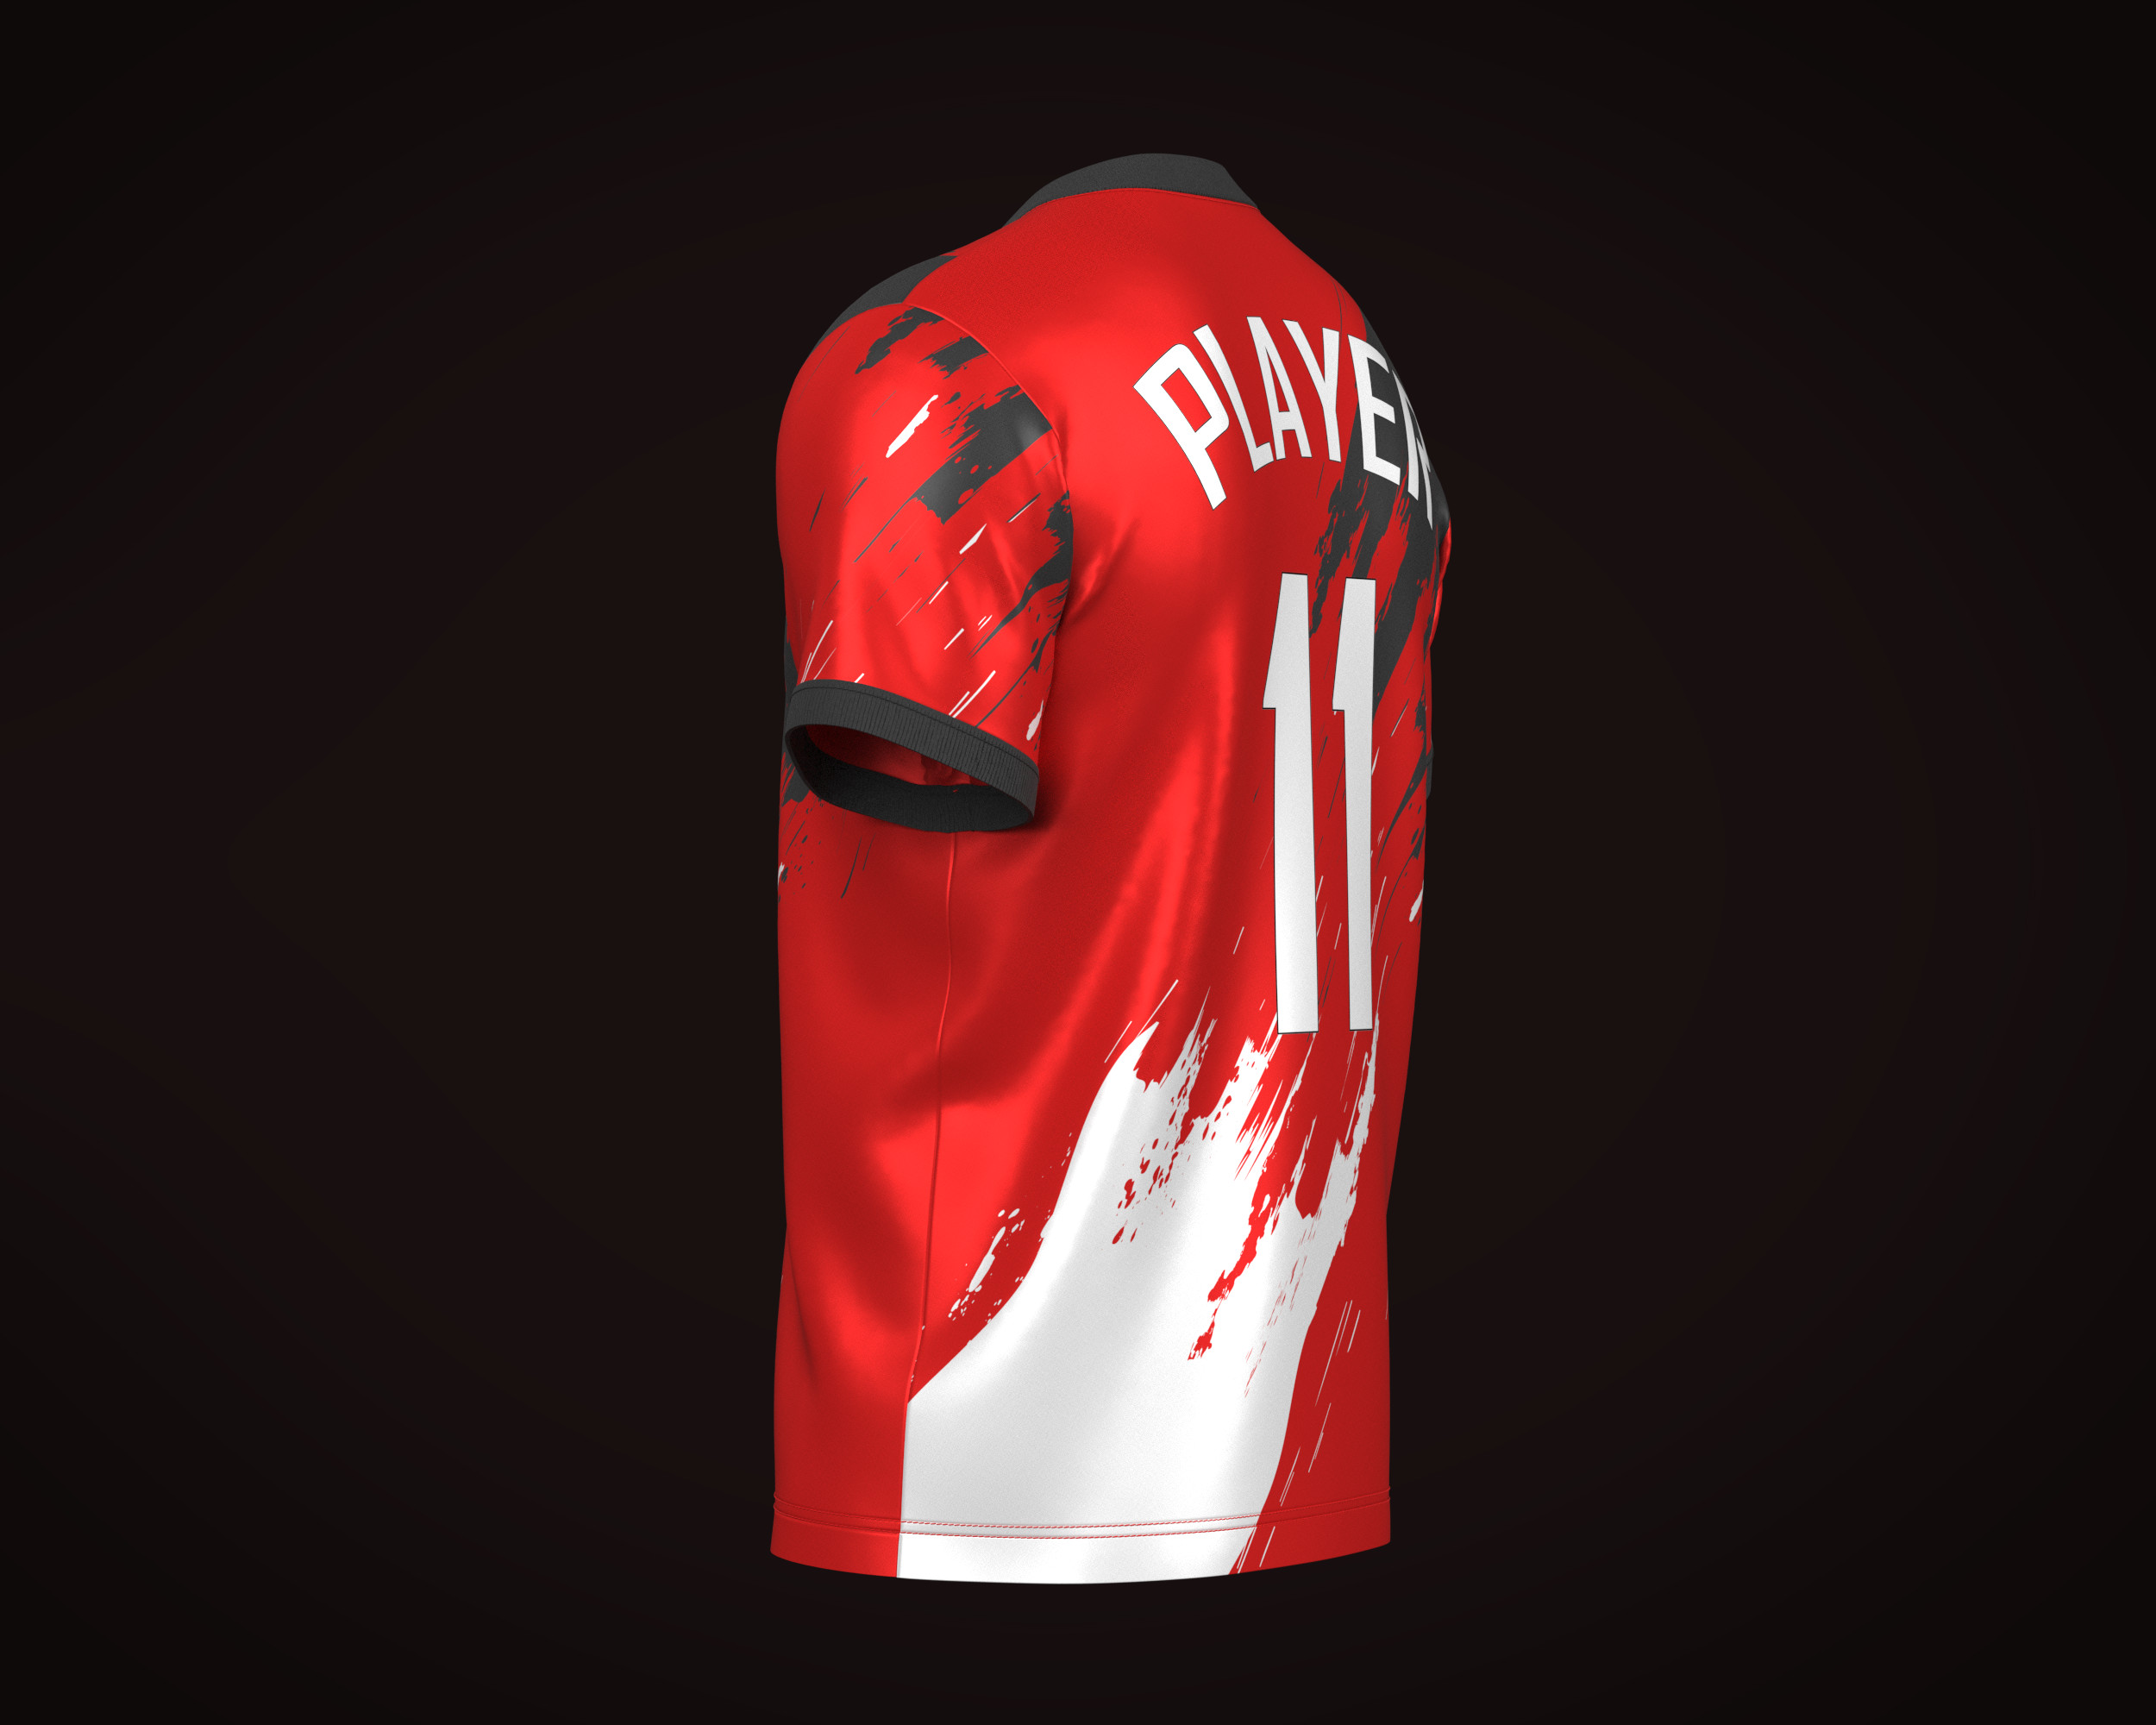 ArtStation - Soccer Football Fire Red color Jersey Player-11